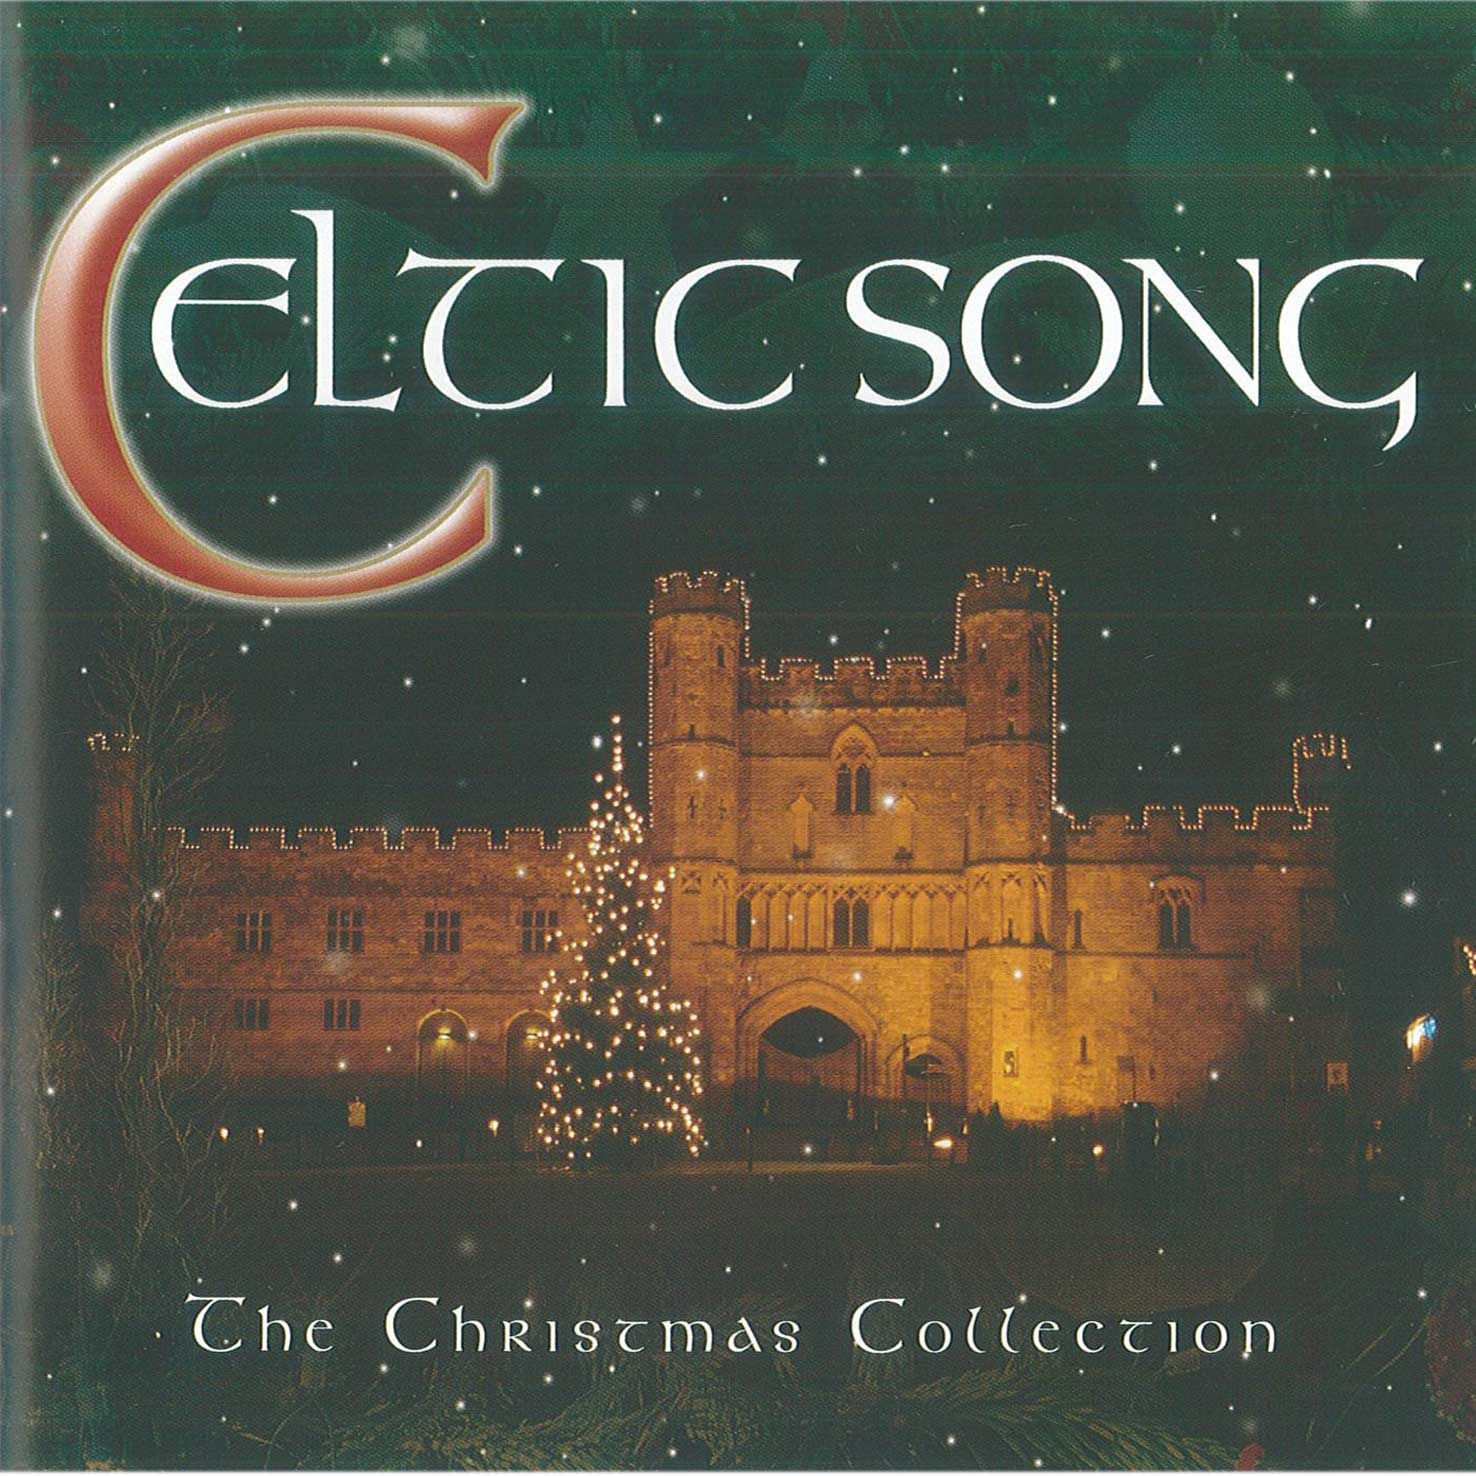 Celtic Song - The Christmas Collections